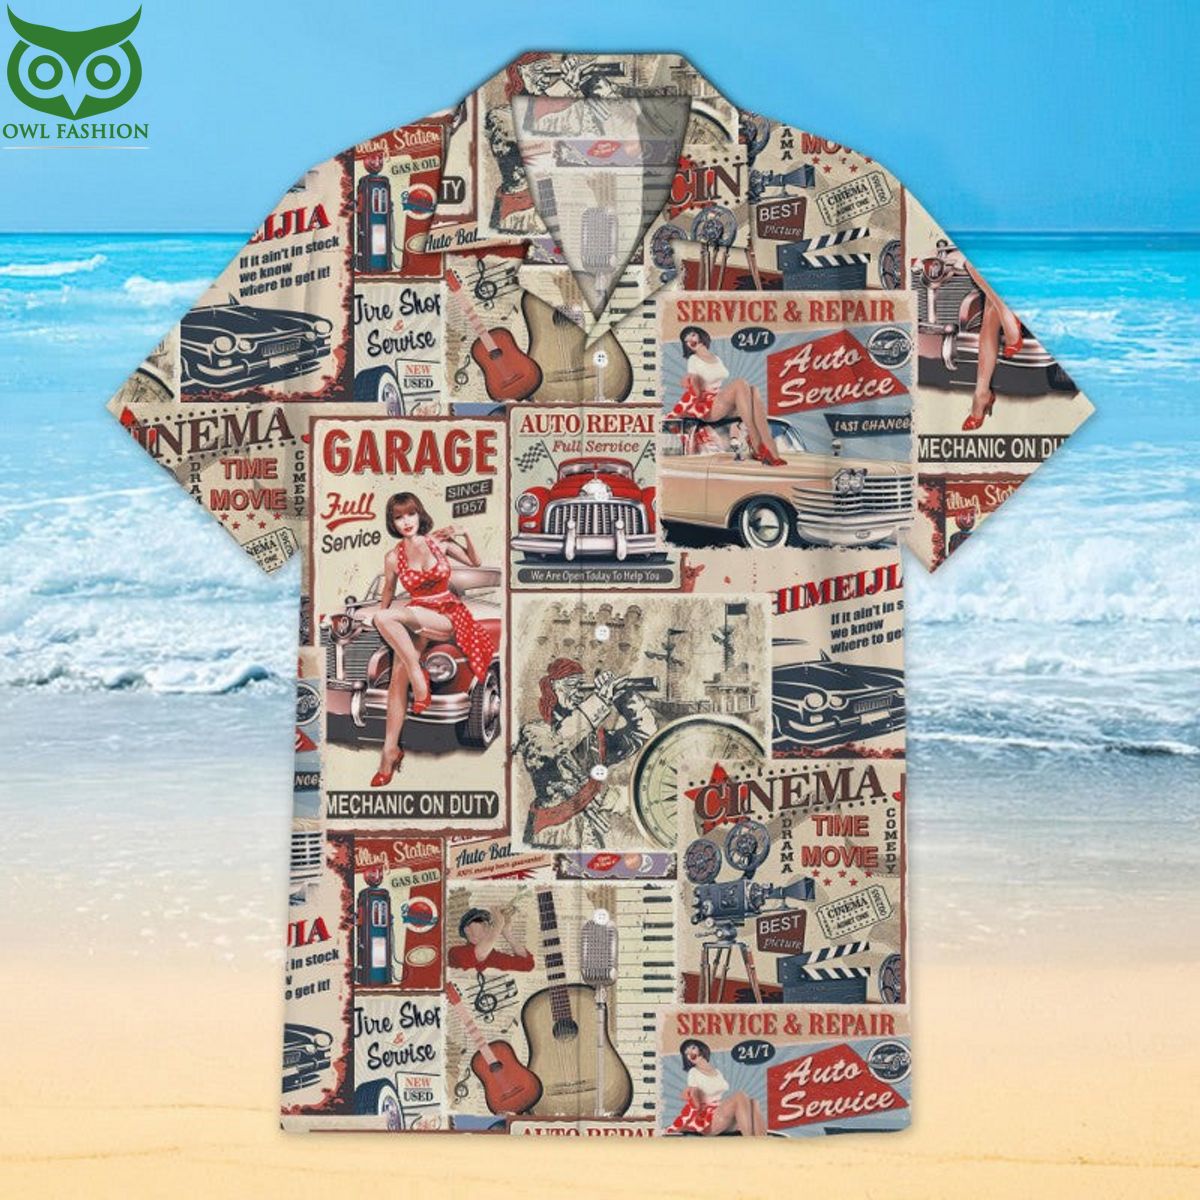 Beauty and the Cars Globe Hawaiian Shirt You look so healthy and fit